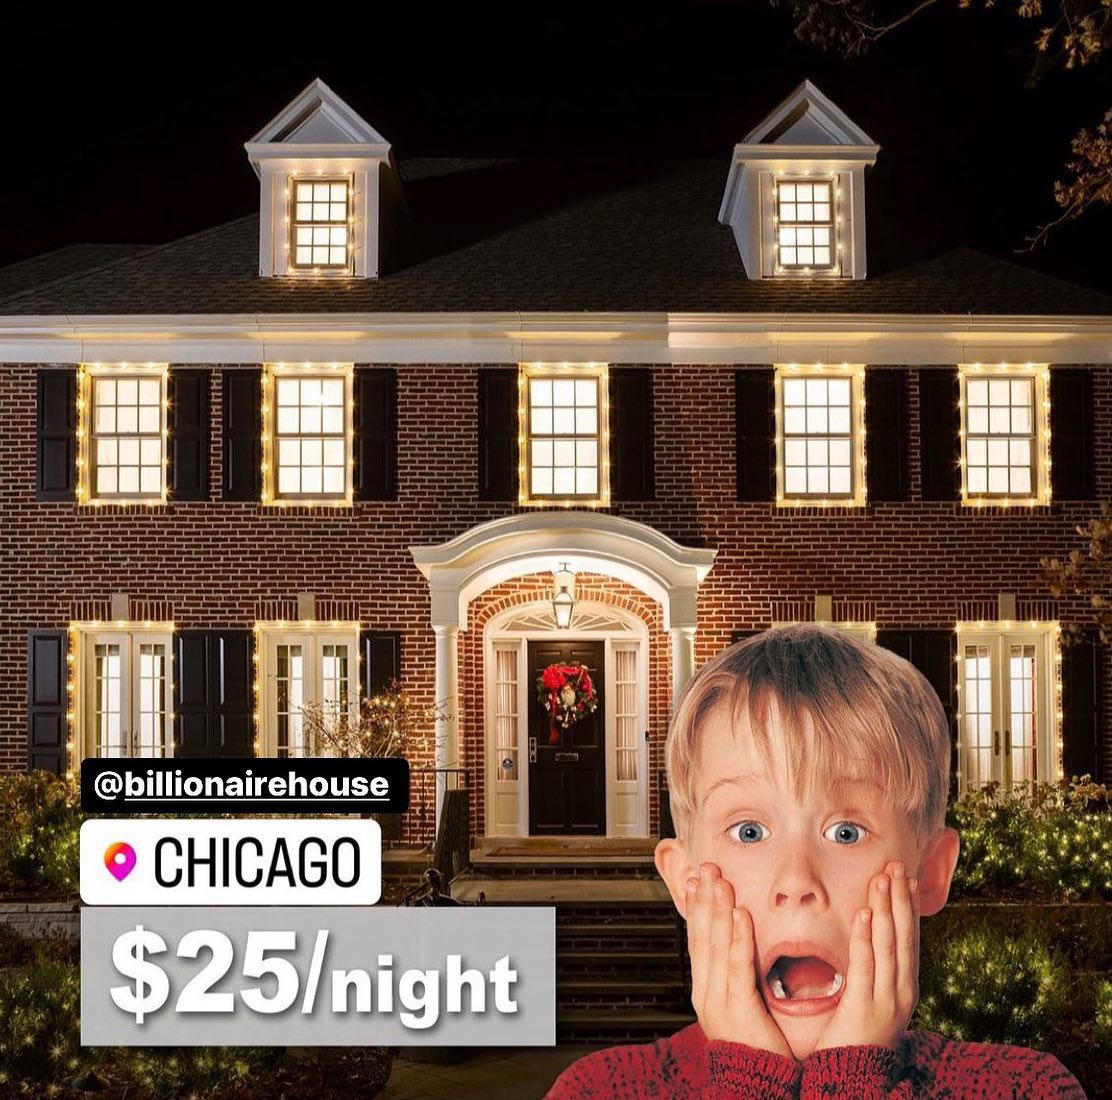 Millionaire Homes - The real-life Home Alone house was available to book on #airbnb for just $25 a n